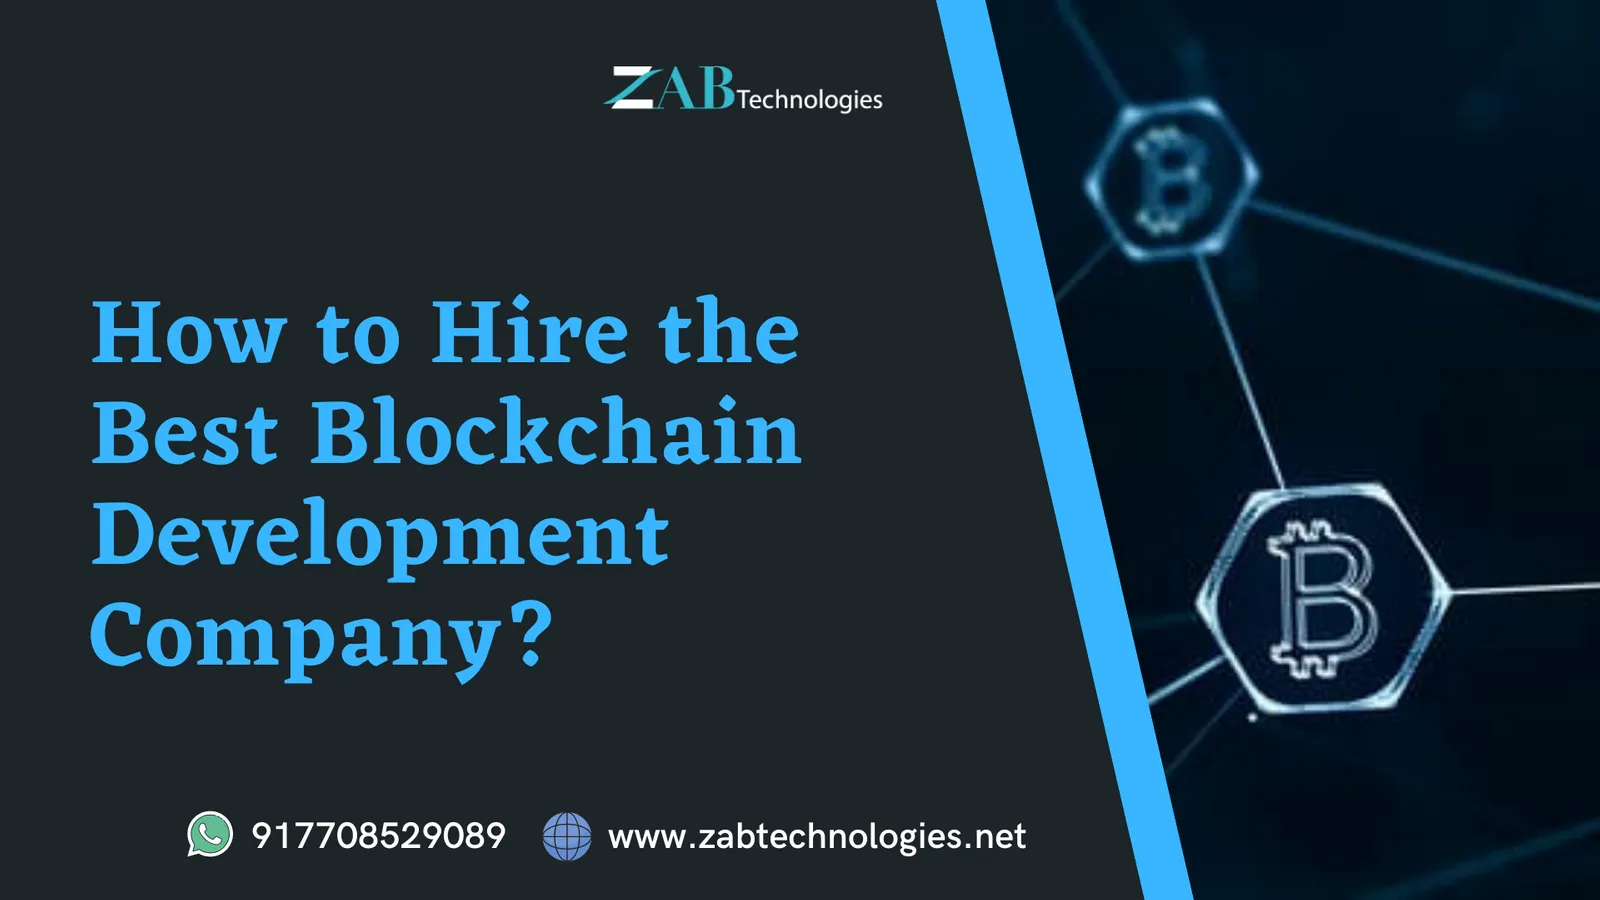 How to Hire the Best Blockchain Development Company?